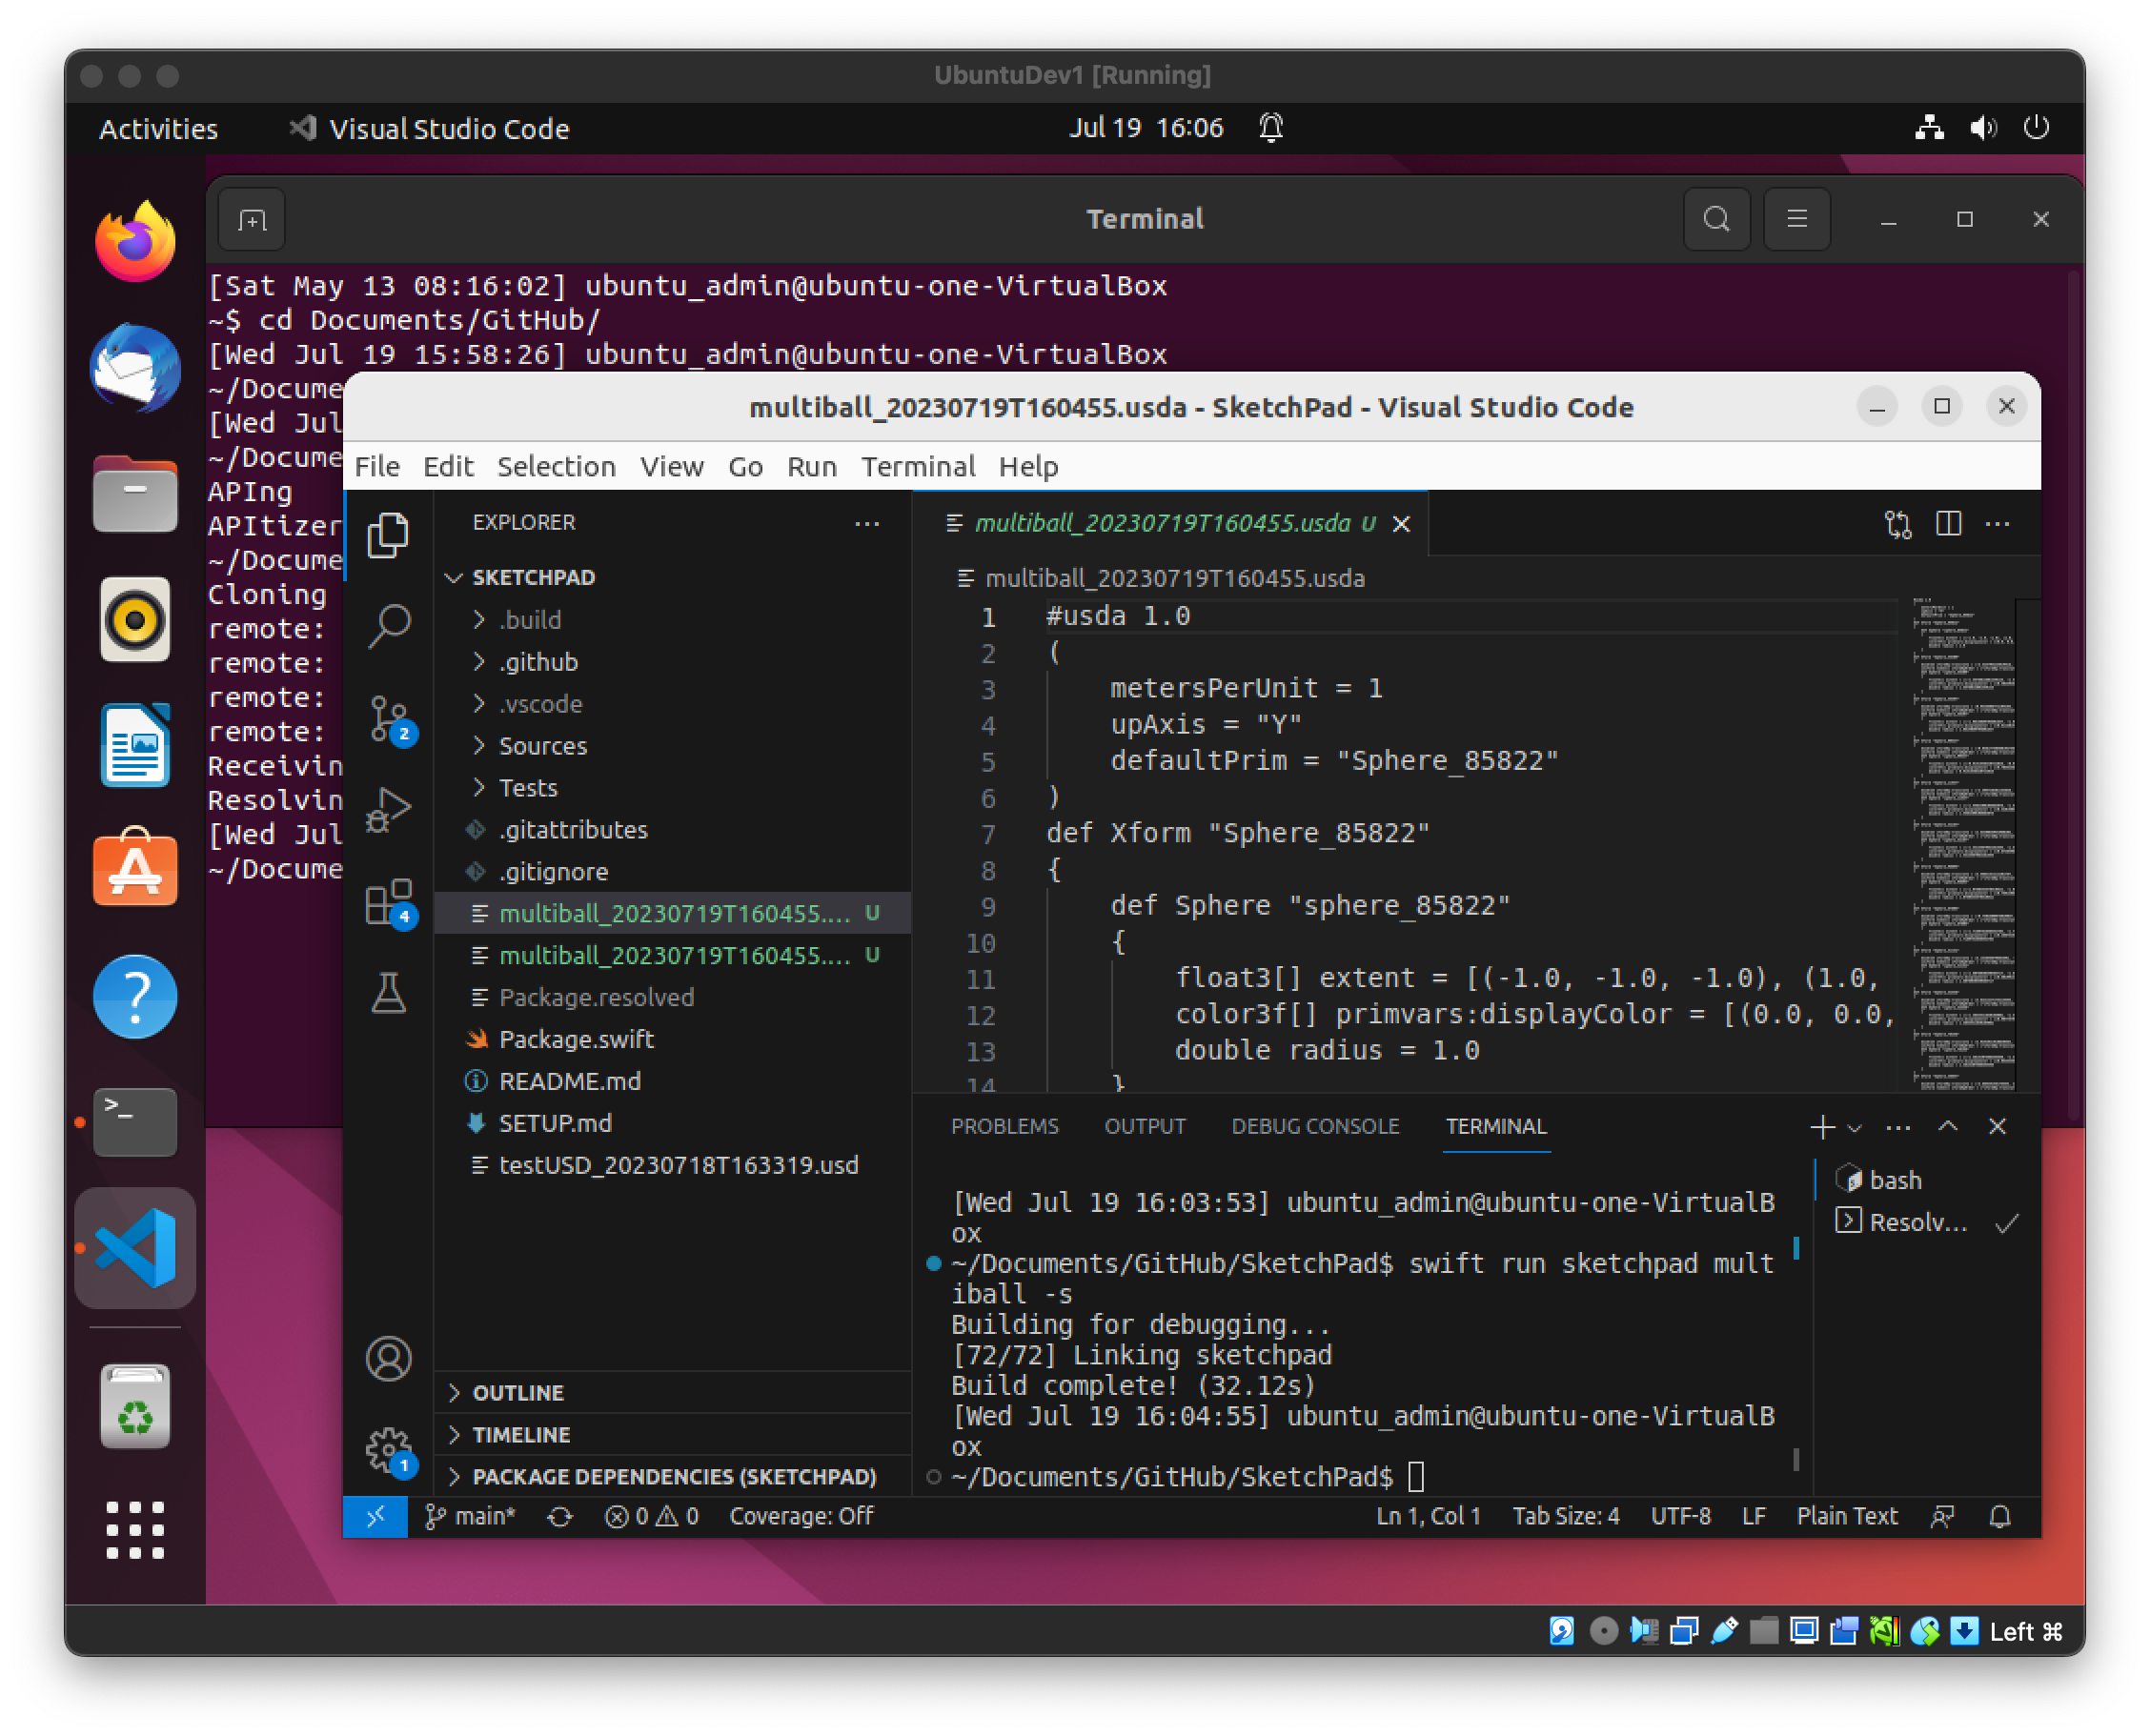 Screenshot of the Linux virtual machine with a VSCode window open to the SketchPad project with a freshly minted .usda file.